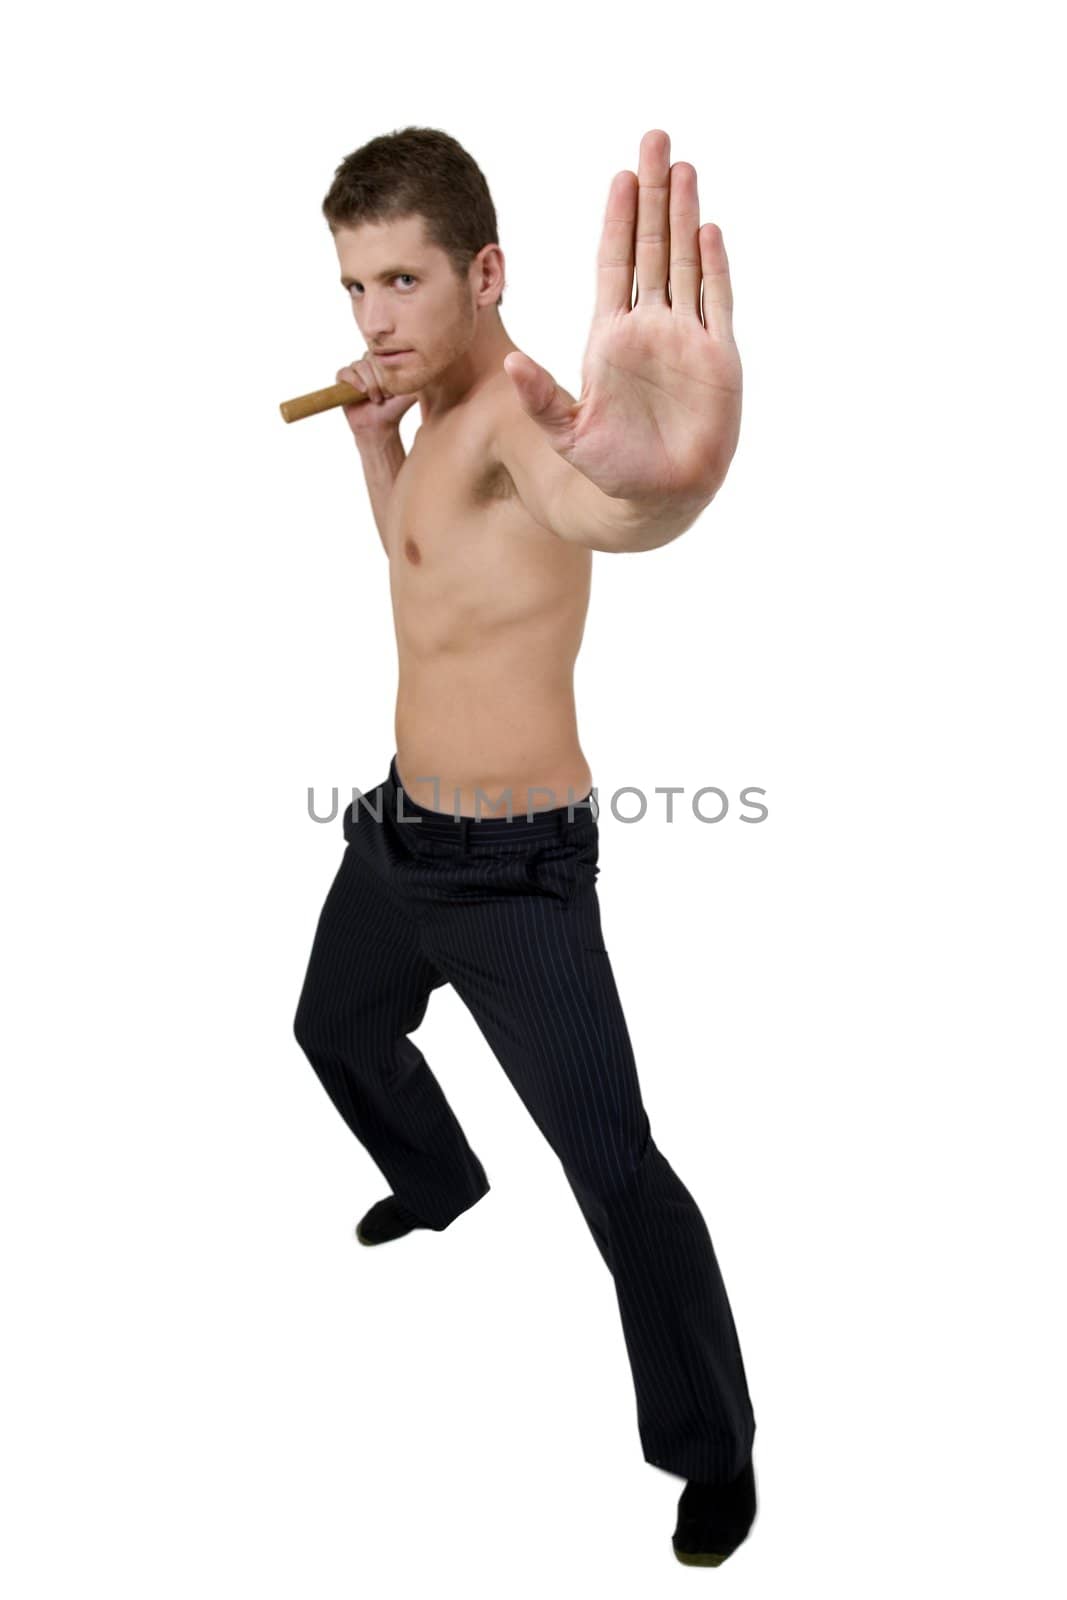 young person holding nunchaku warning to stop on white background